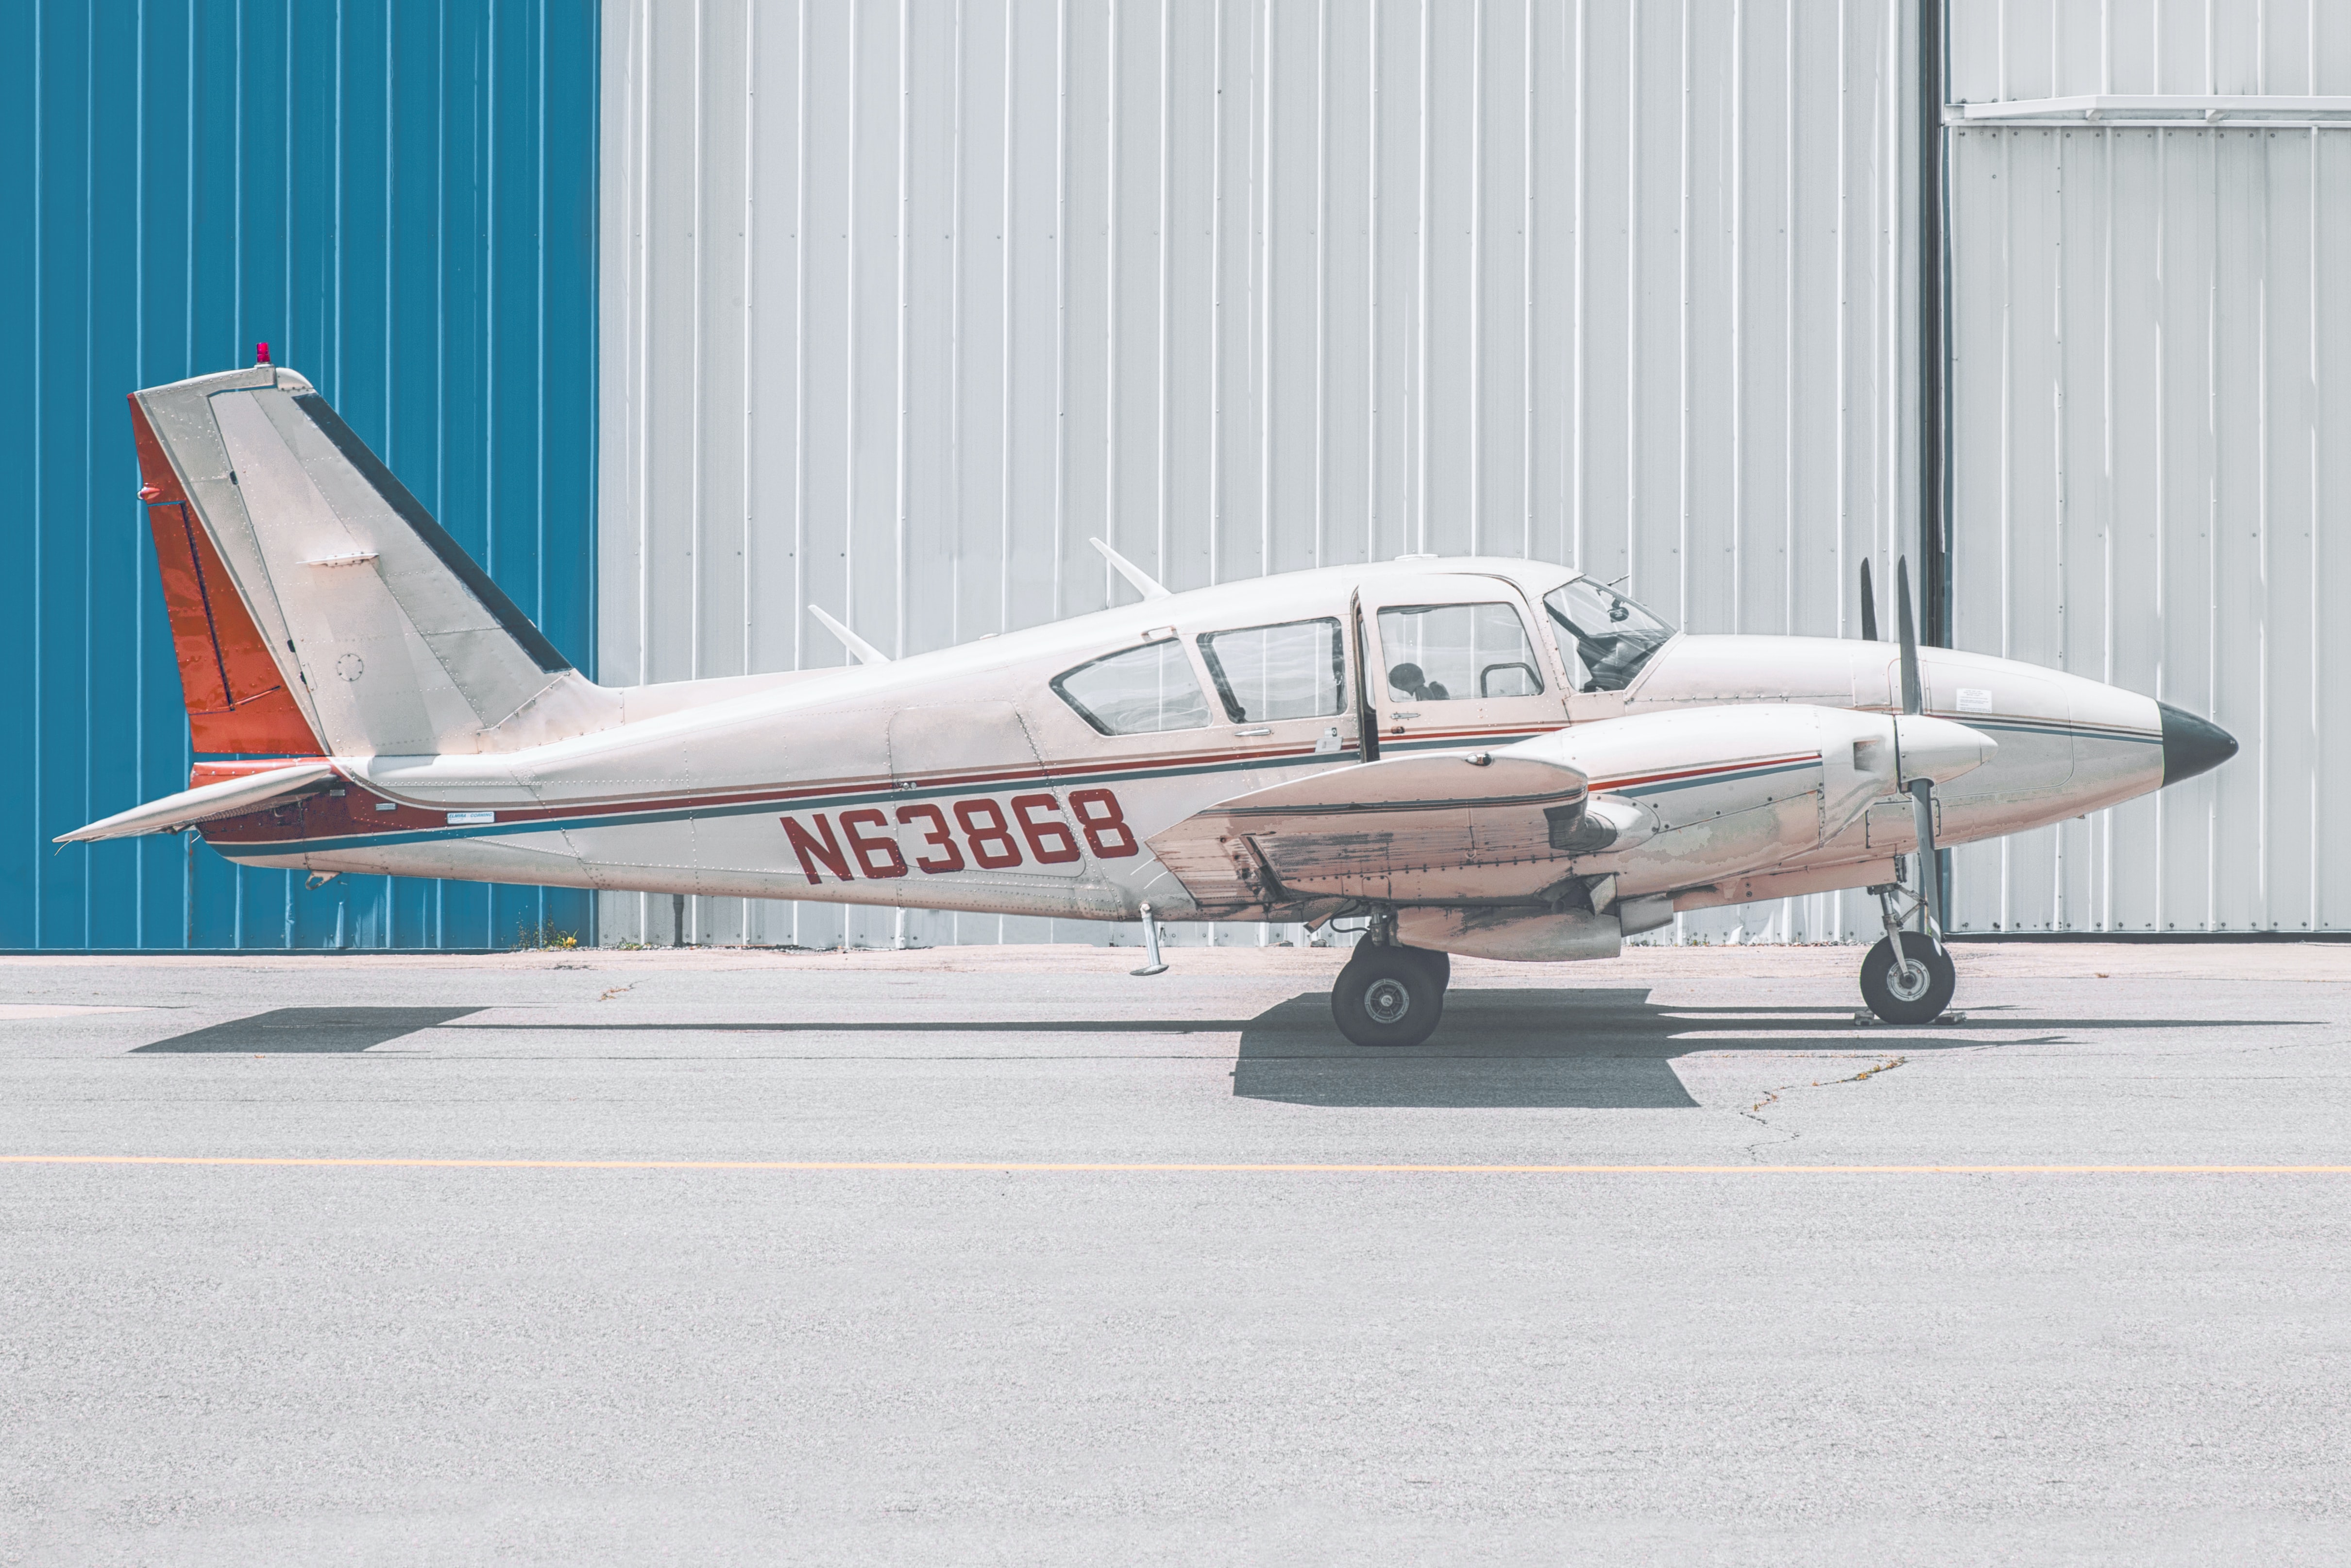 Upgrading Private Pilot Licence (PPL) to Commercial Pilot Licence (CPL)